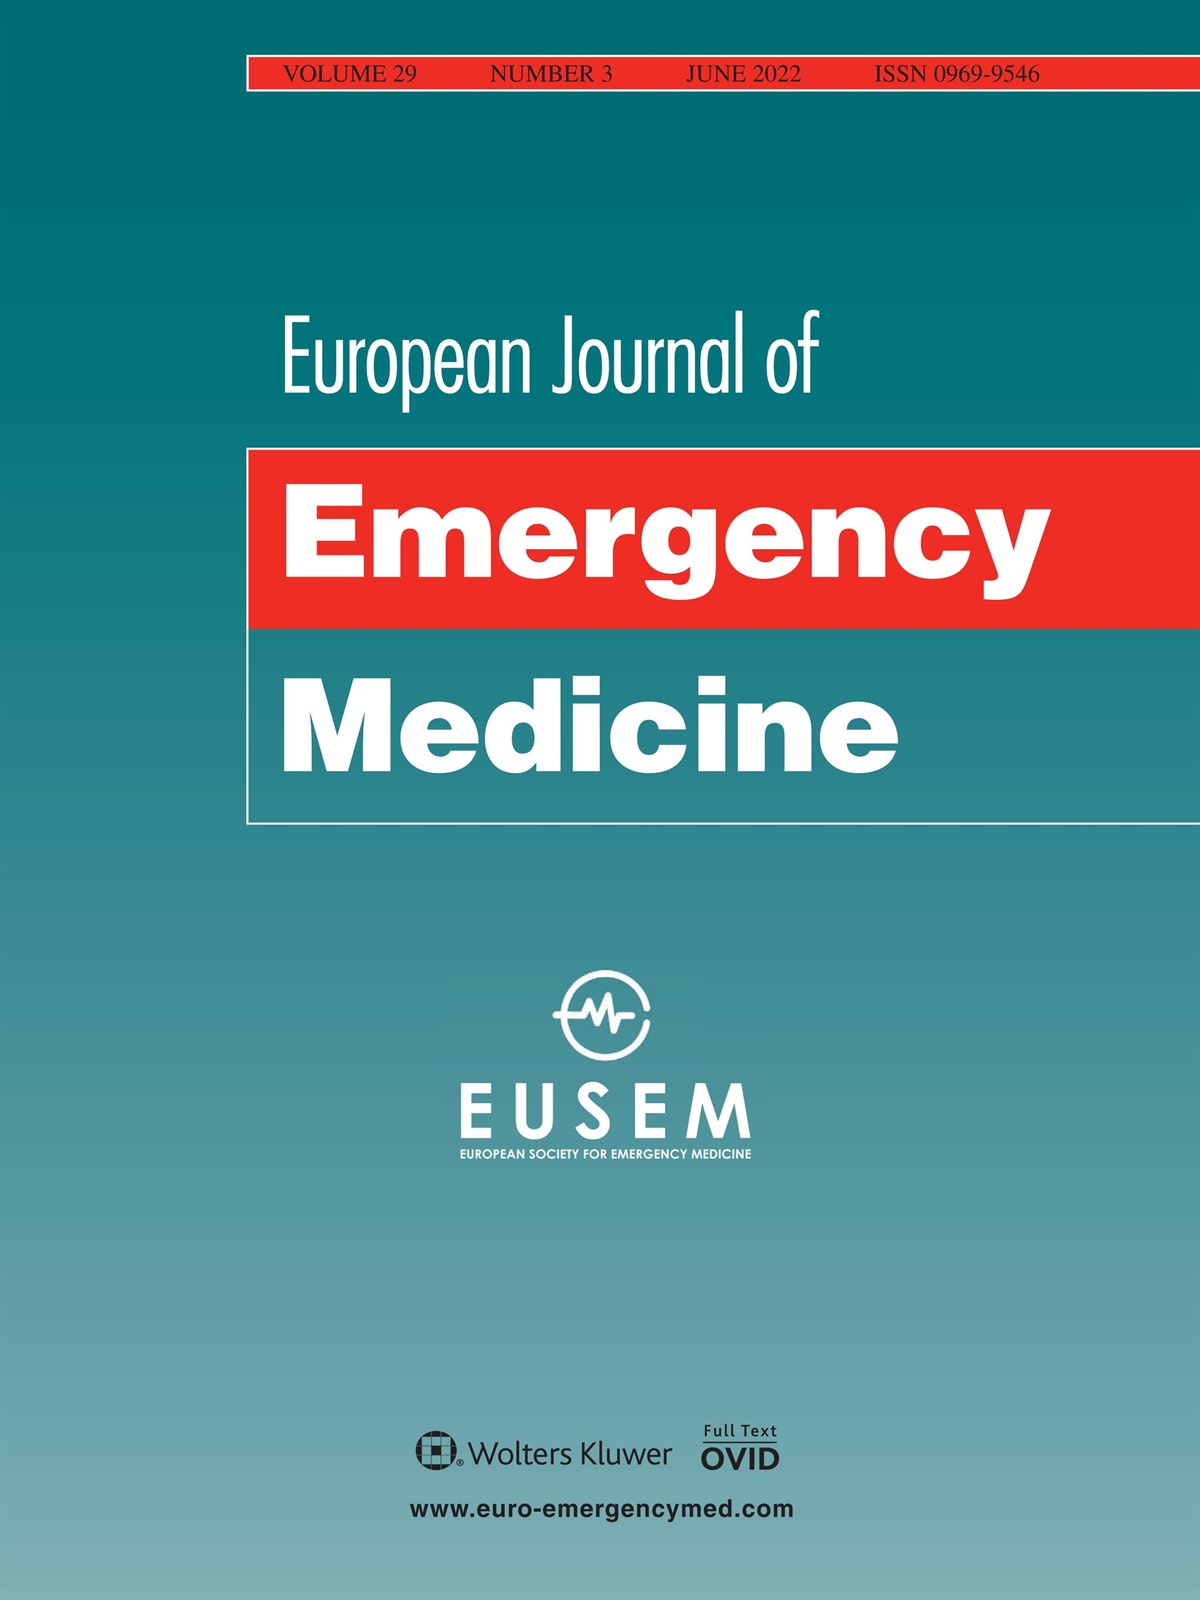 The role of the European Society for Emergency Medicine in wartime